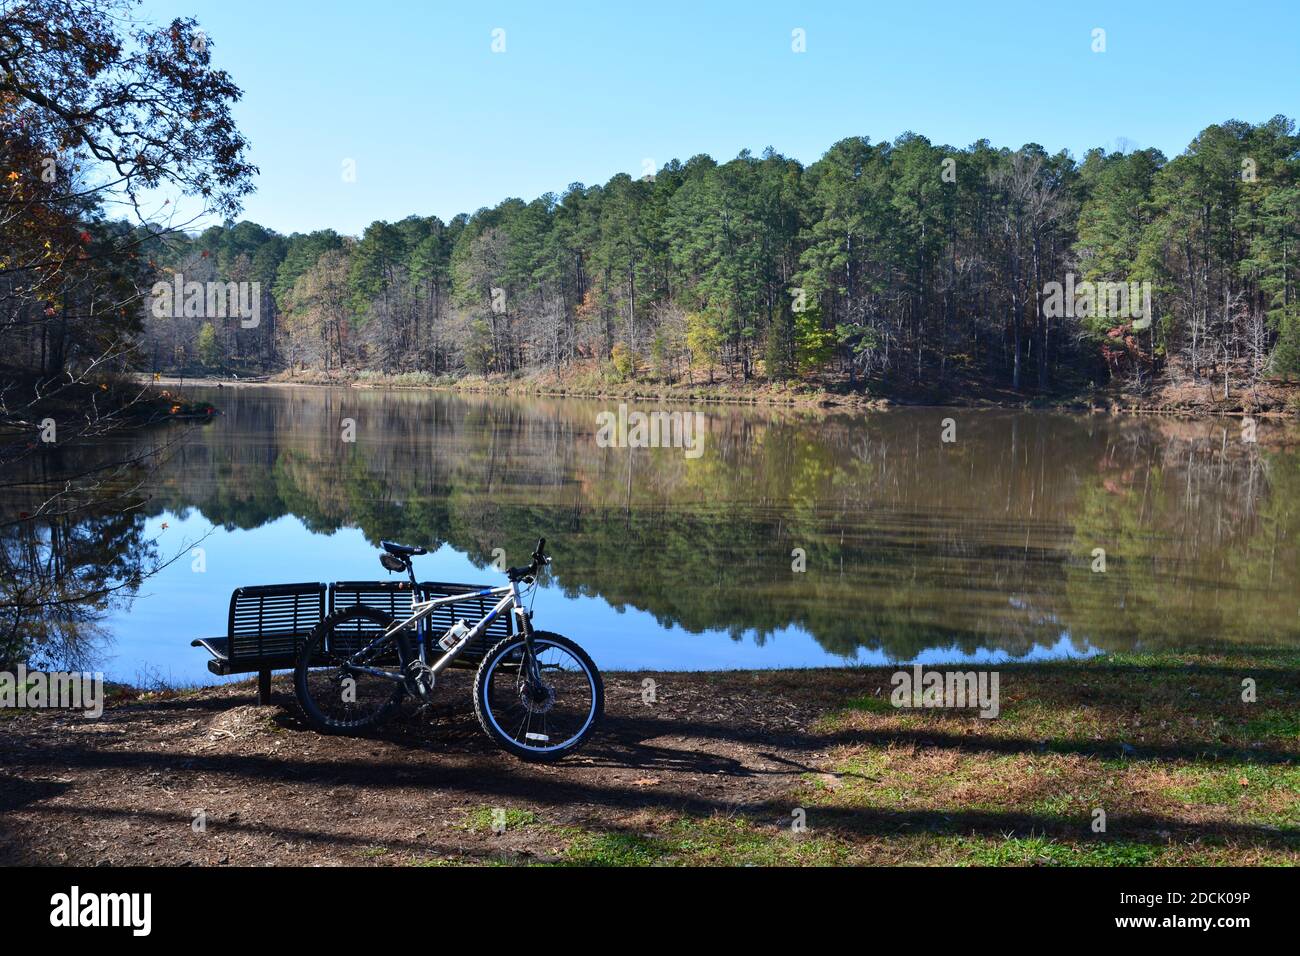 Reedy Creek Lake nell'Umstead state Park di Raleigh, North Carolina. Foto Stock